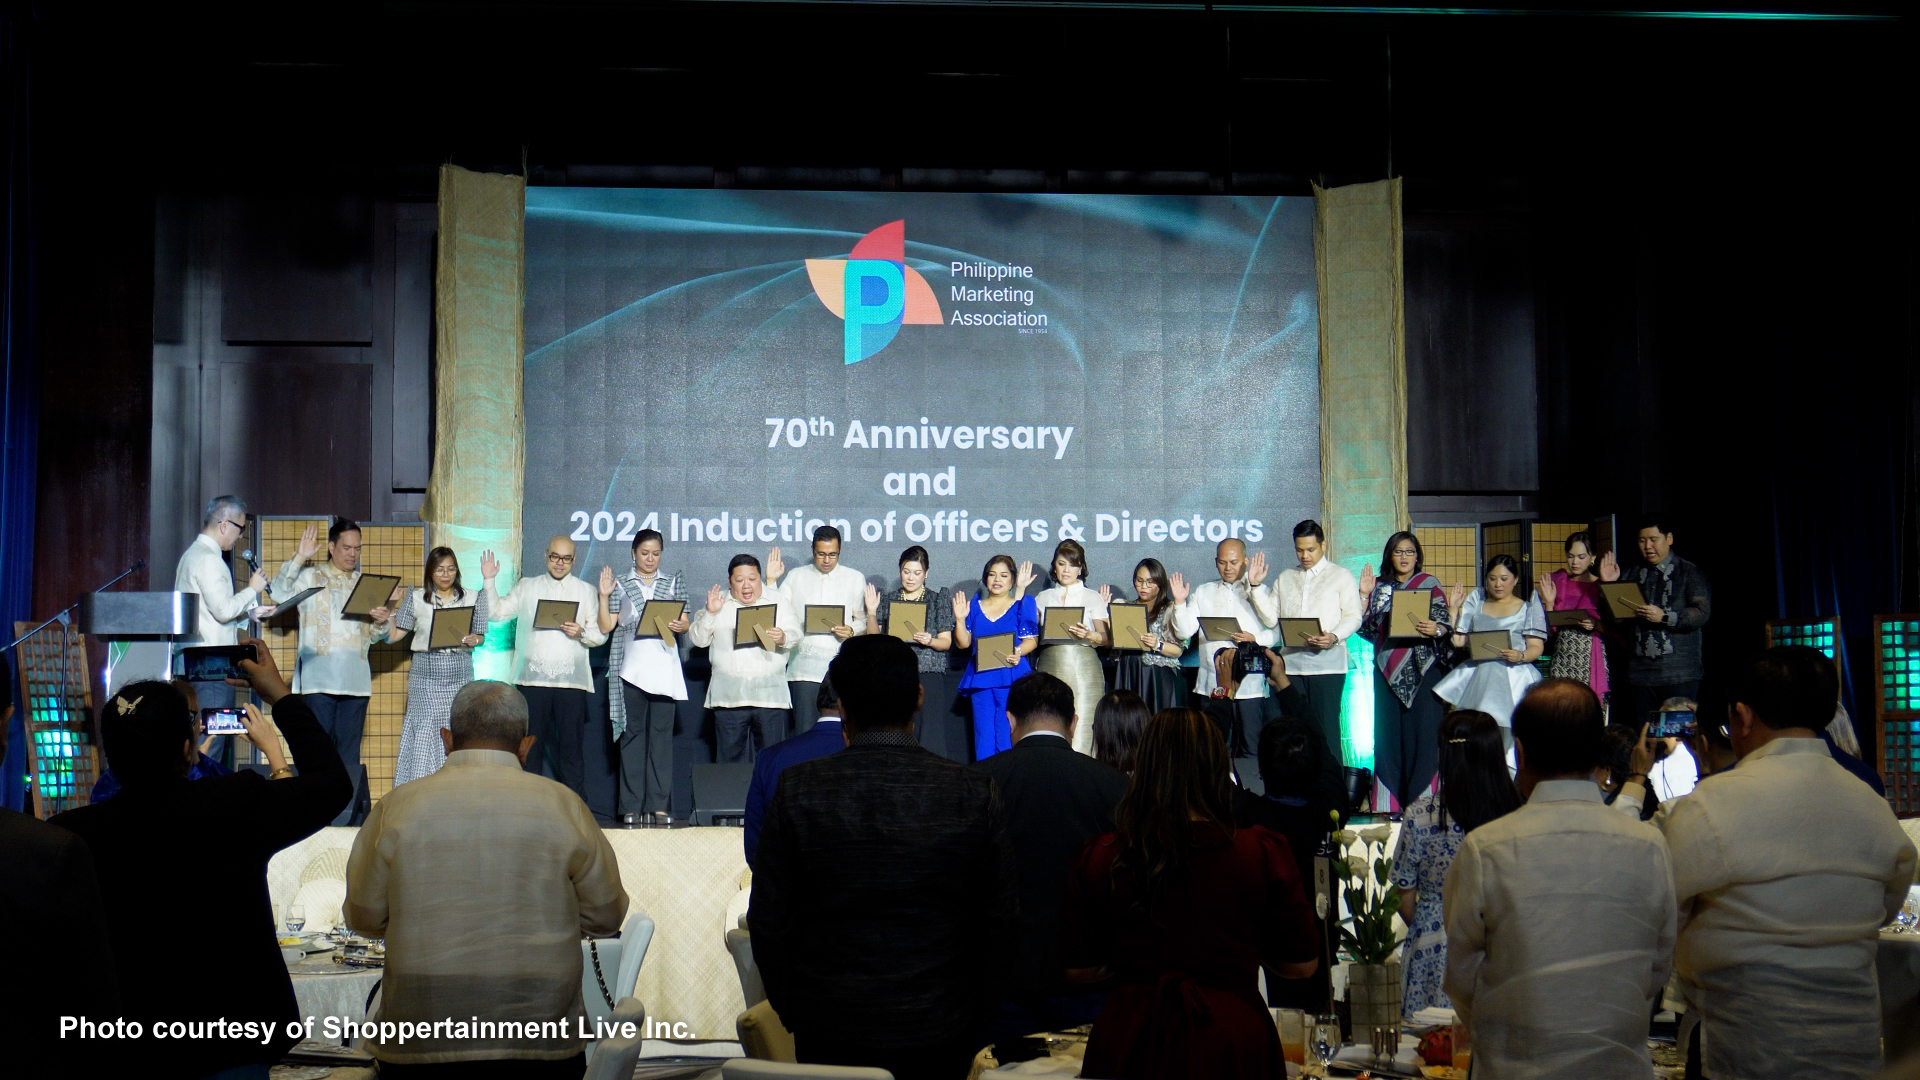 Philippine Marketing Association Celebrates 70th Anniversary with a Focus on Sustainability and Innovation